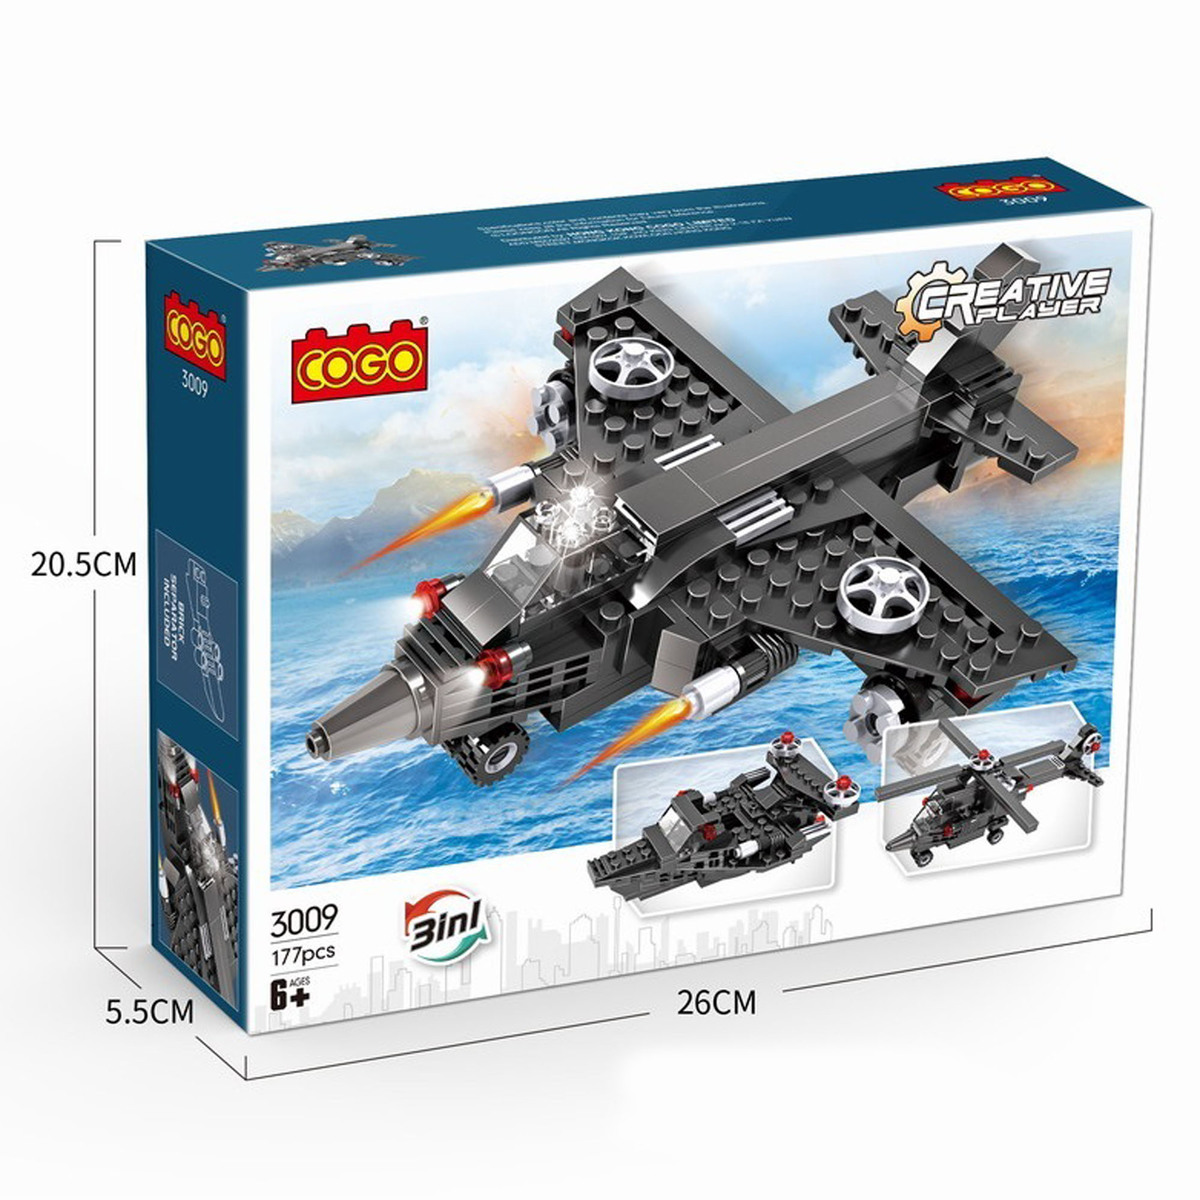 Skid Fusion 3-in-1 Helicopter Bricks, 3009